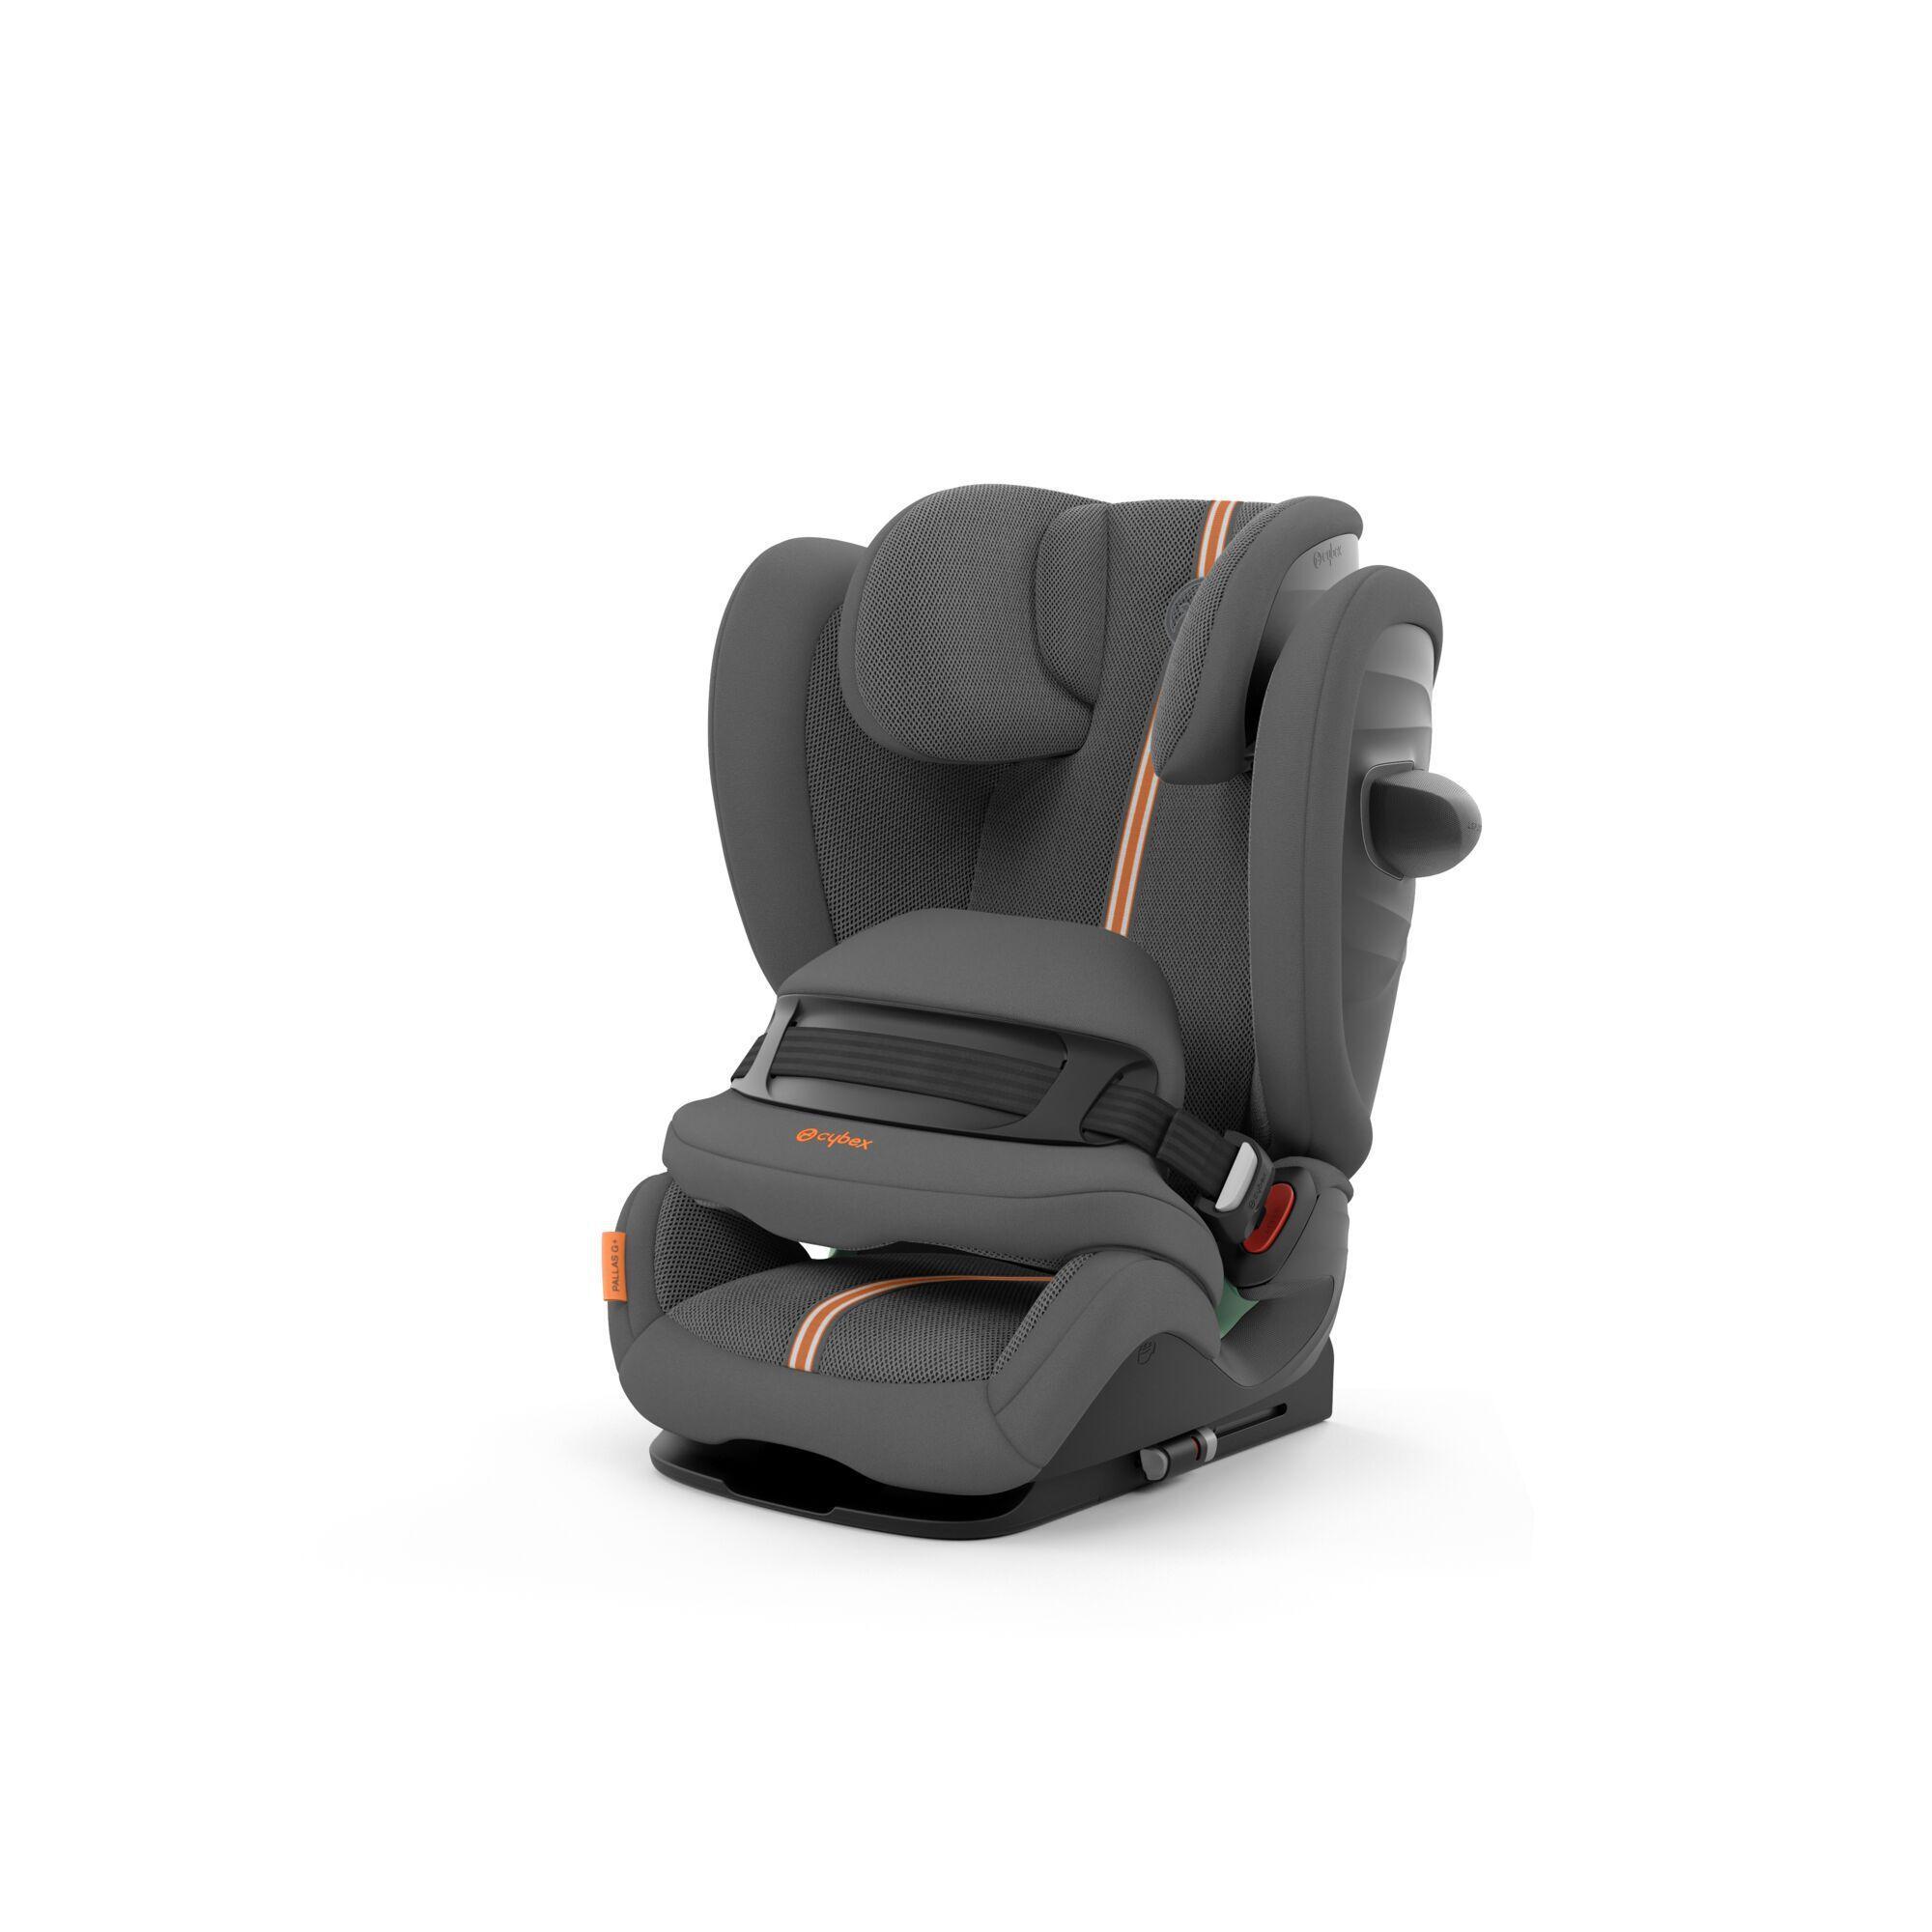 Cybex Pallas G i-Size Car Seat, Lava Grey: Buy Online at Best Price in UAE  